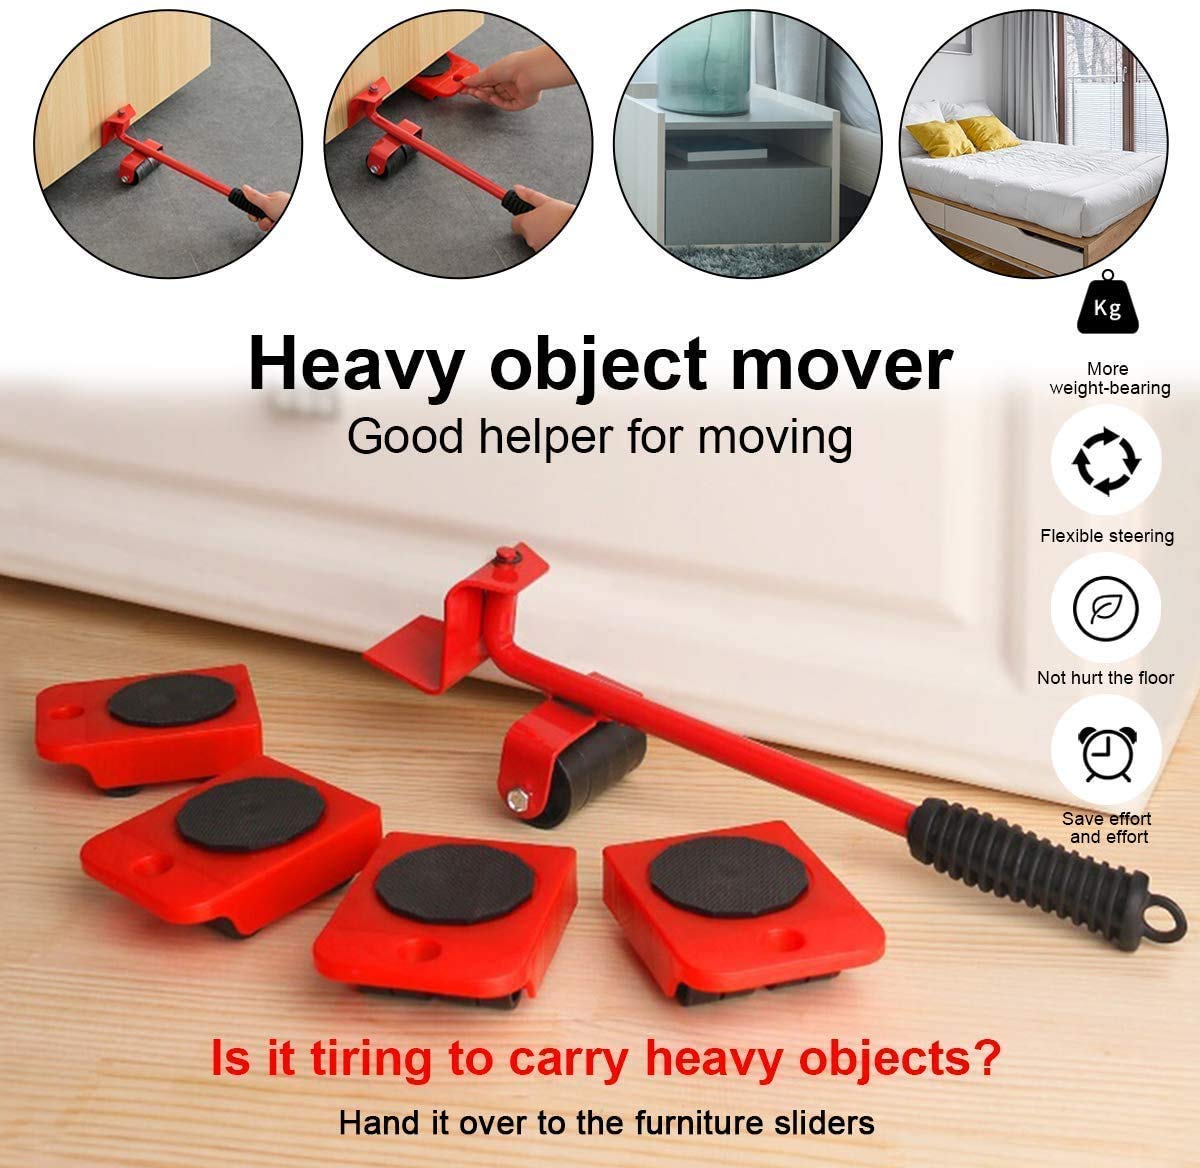 5 Packs Furniture Lifter Heavy Furniture Moving System Lifter Kit